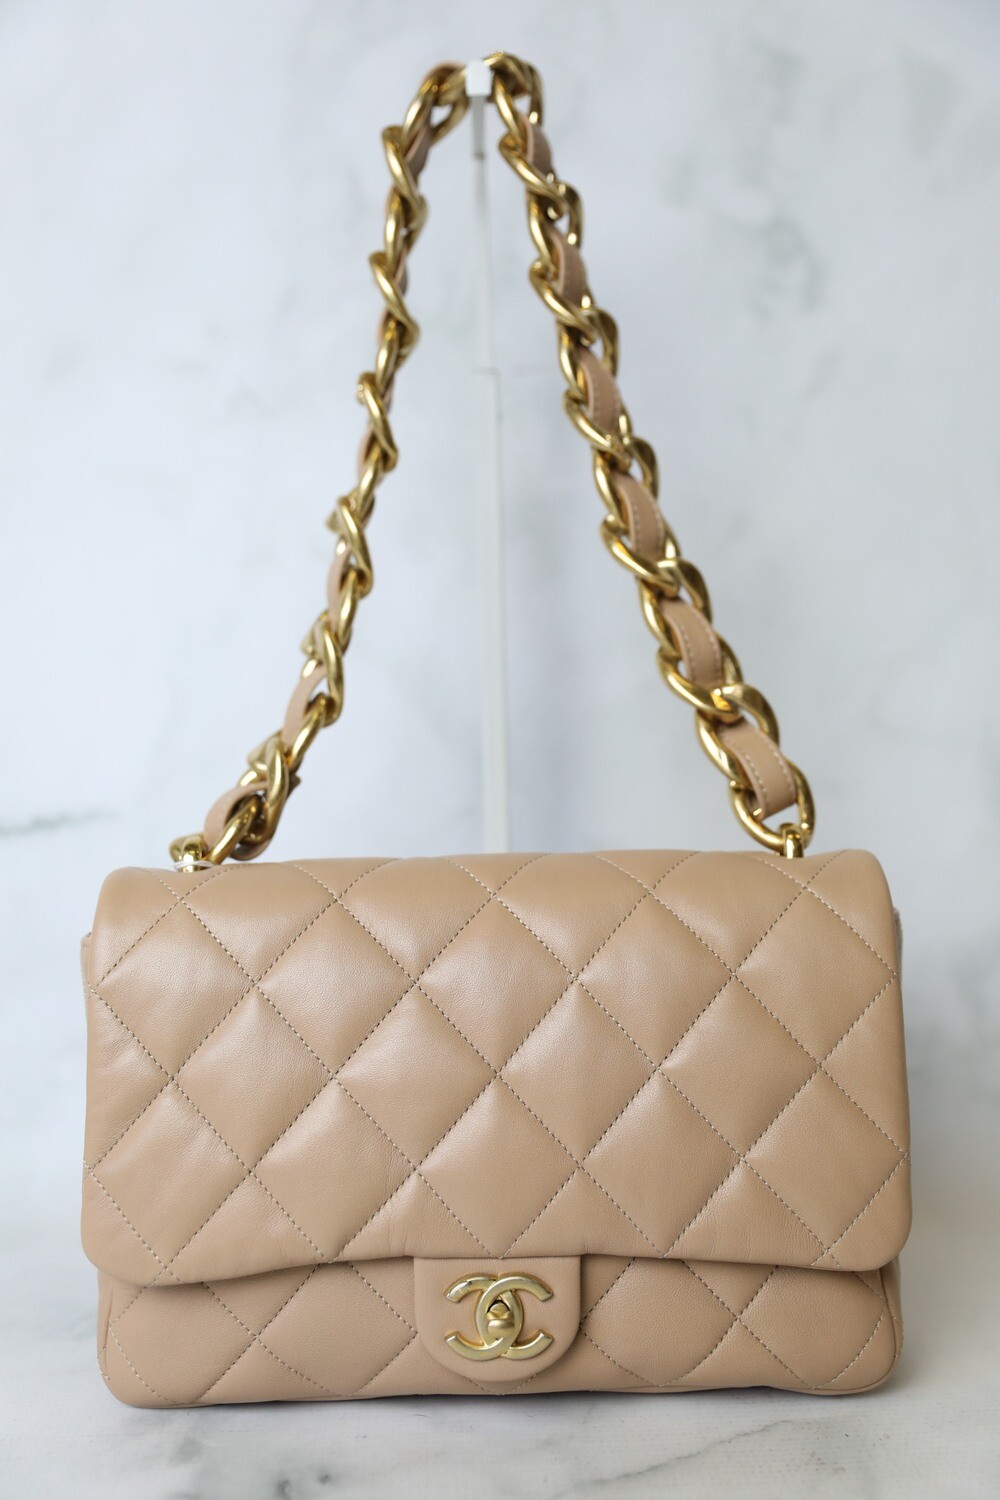 Chanel Funky Town Flap Large, Beige Lambskin with Gold Hardware, Preowned  in Box WA001 - Julia Rose Boston